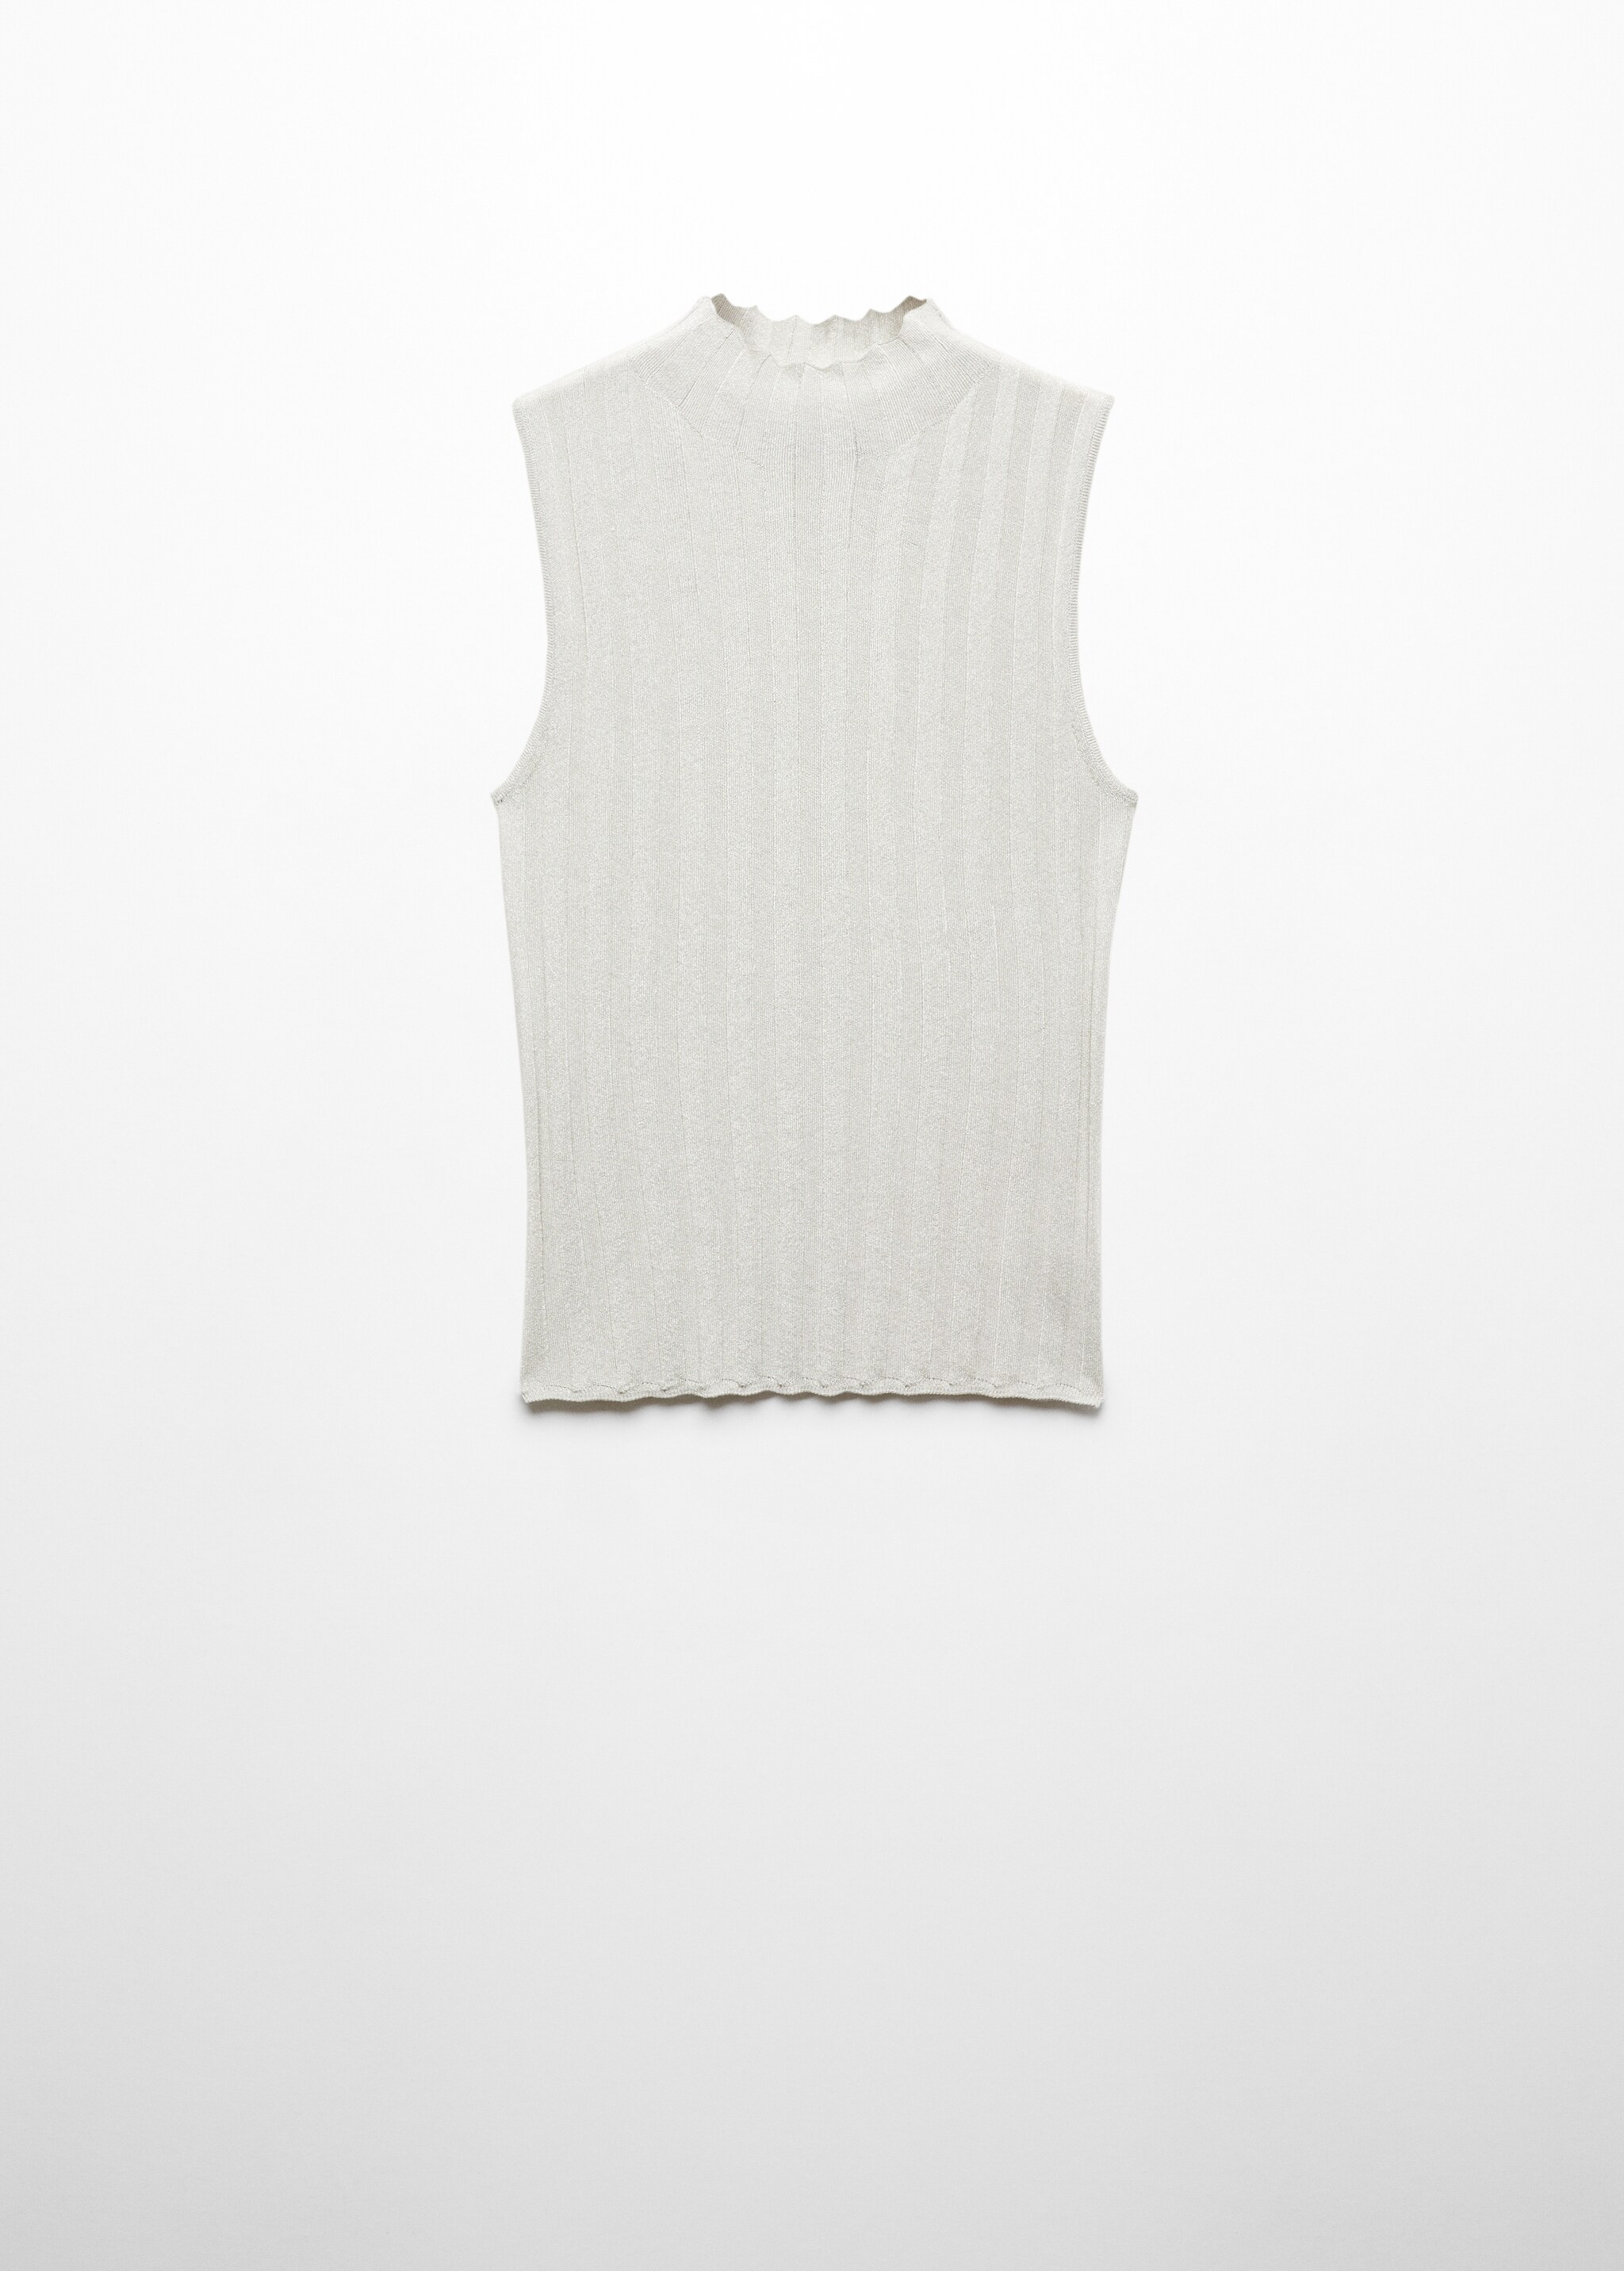 Turtleneck ribbed top - Article without model